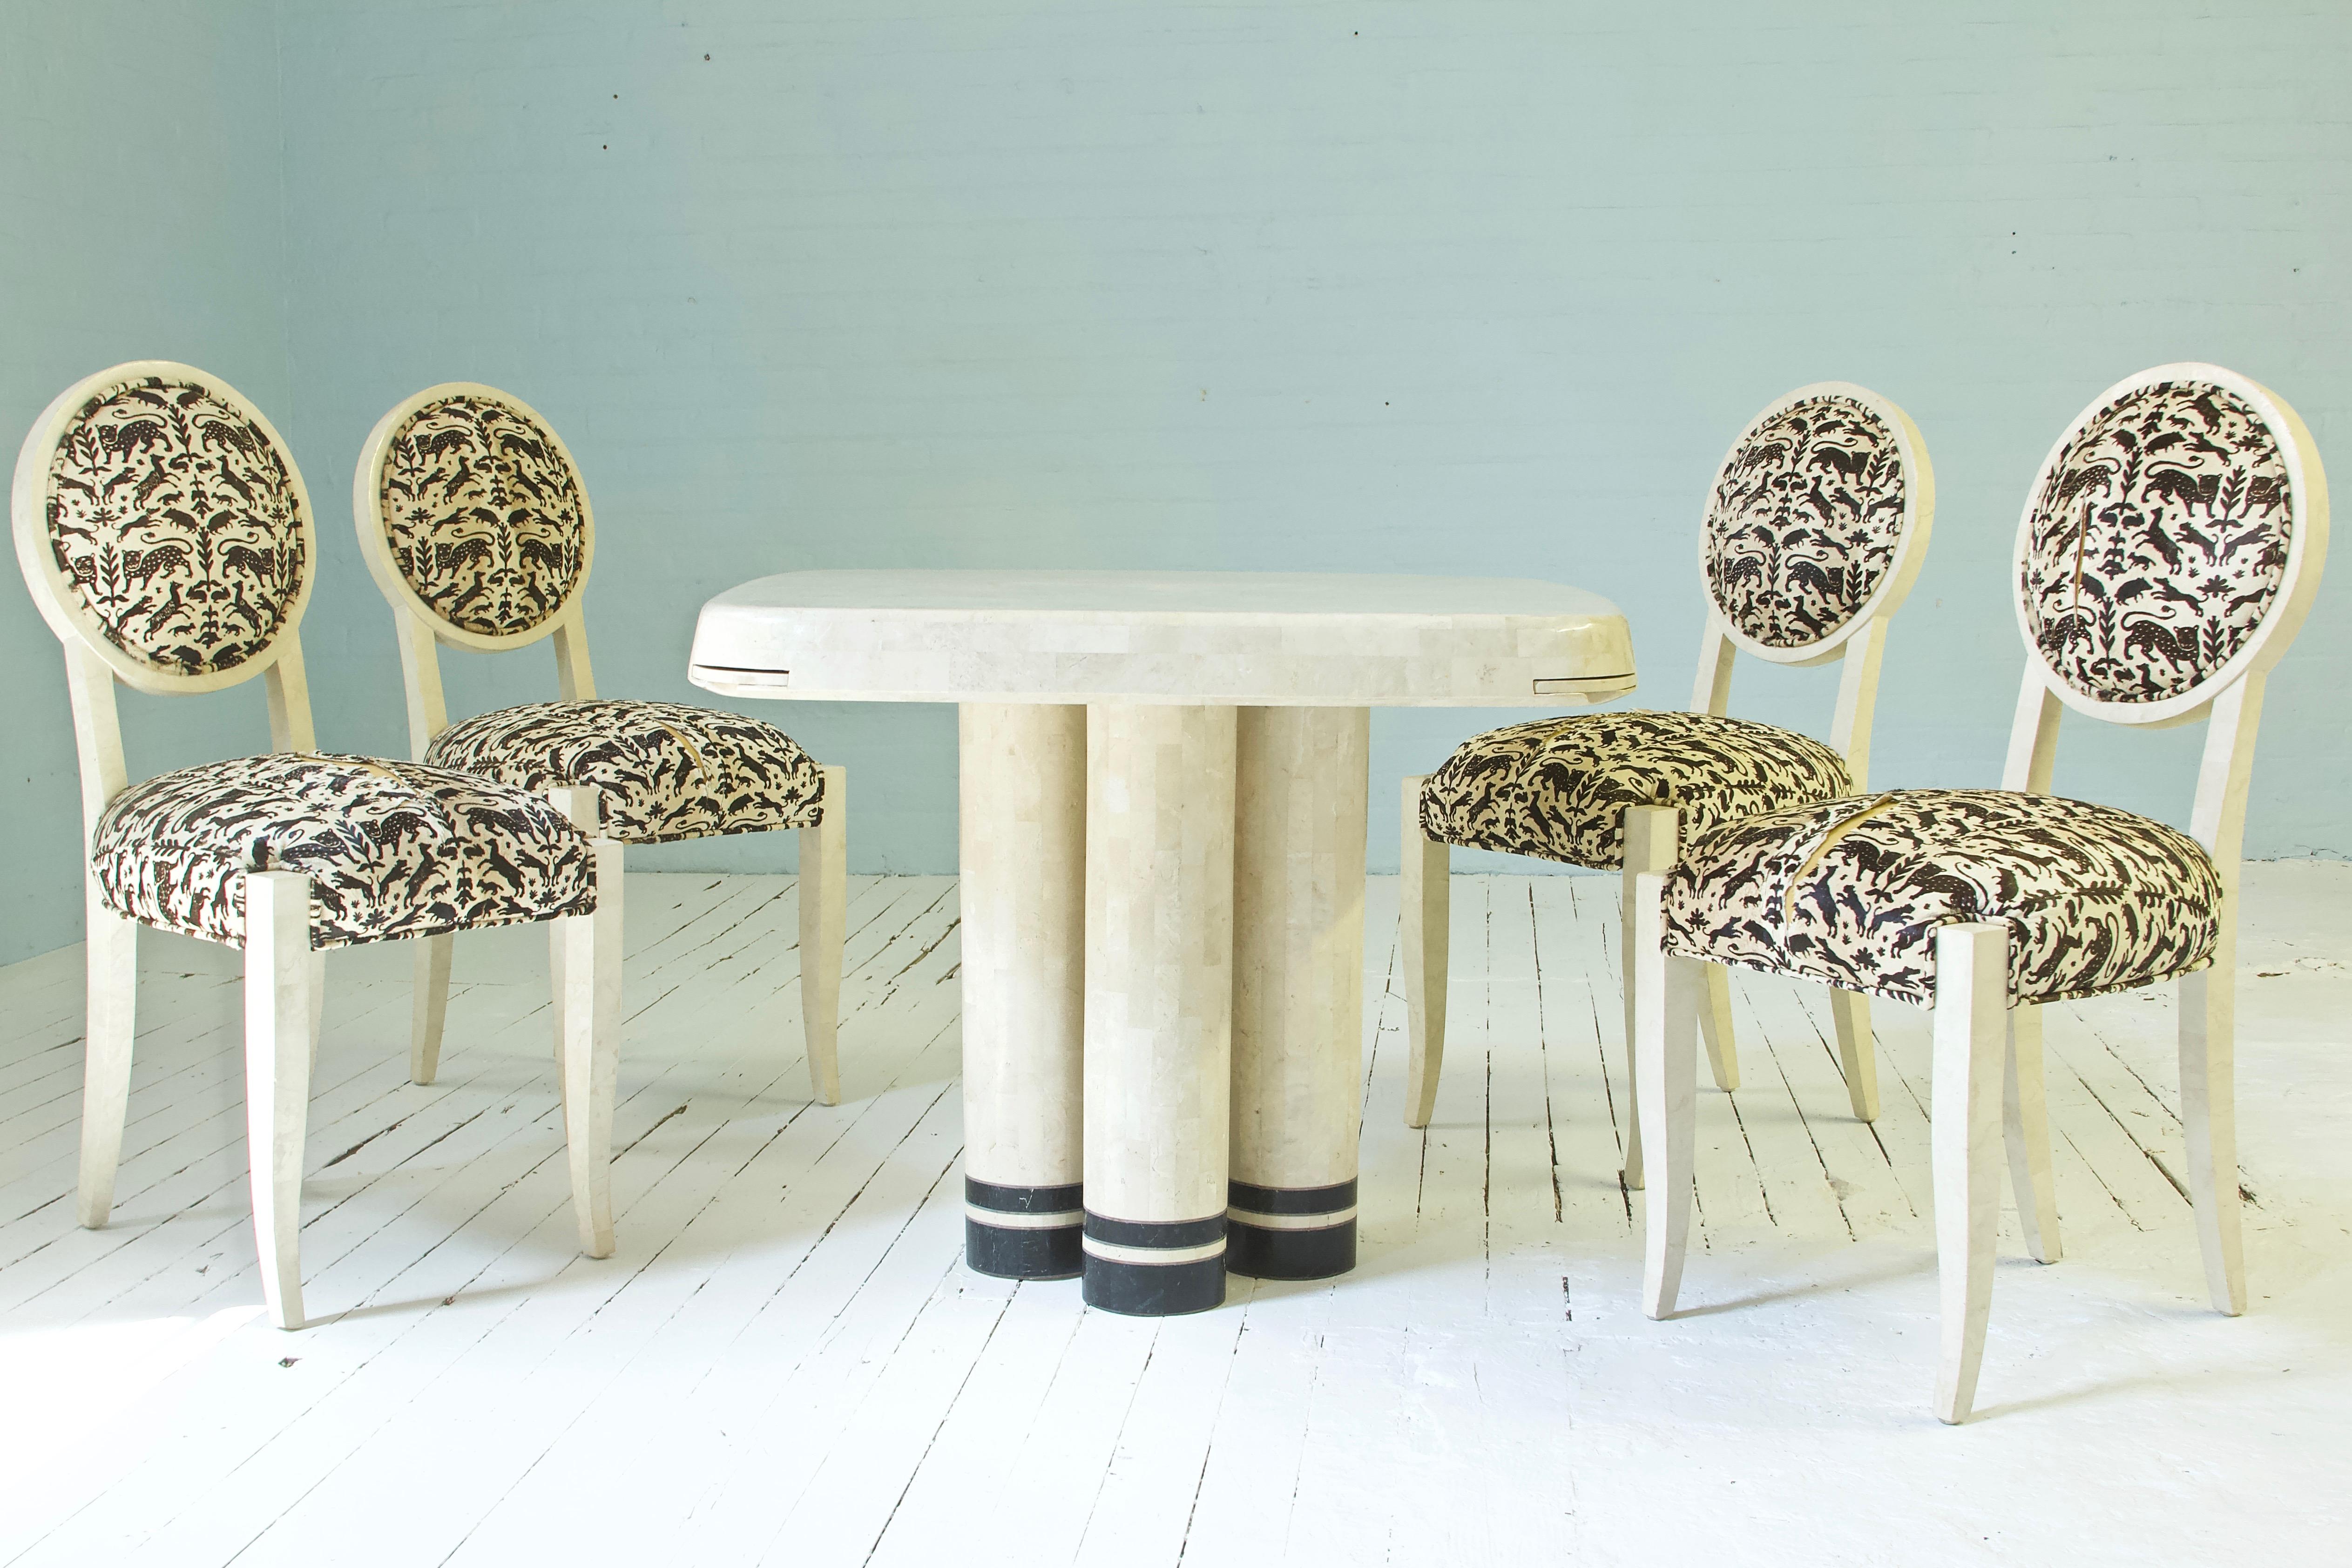 Great statement set comprised of four balloon back chairs and one table with pedestal base and four retractable cup holders. The table can function as a game table, a cocktail table, or just a sophisticated setting for intimate dining. The condition